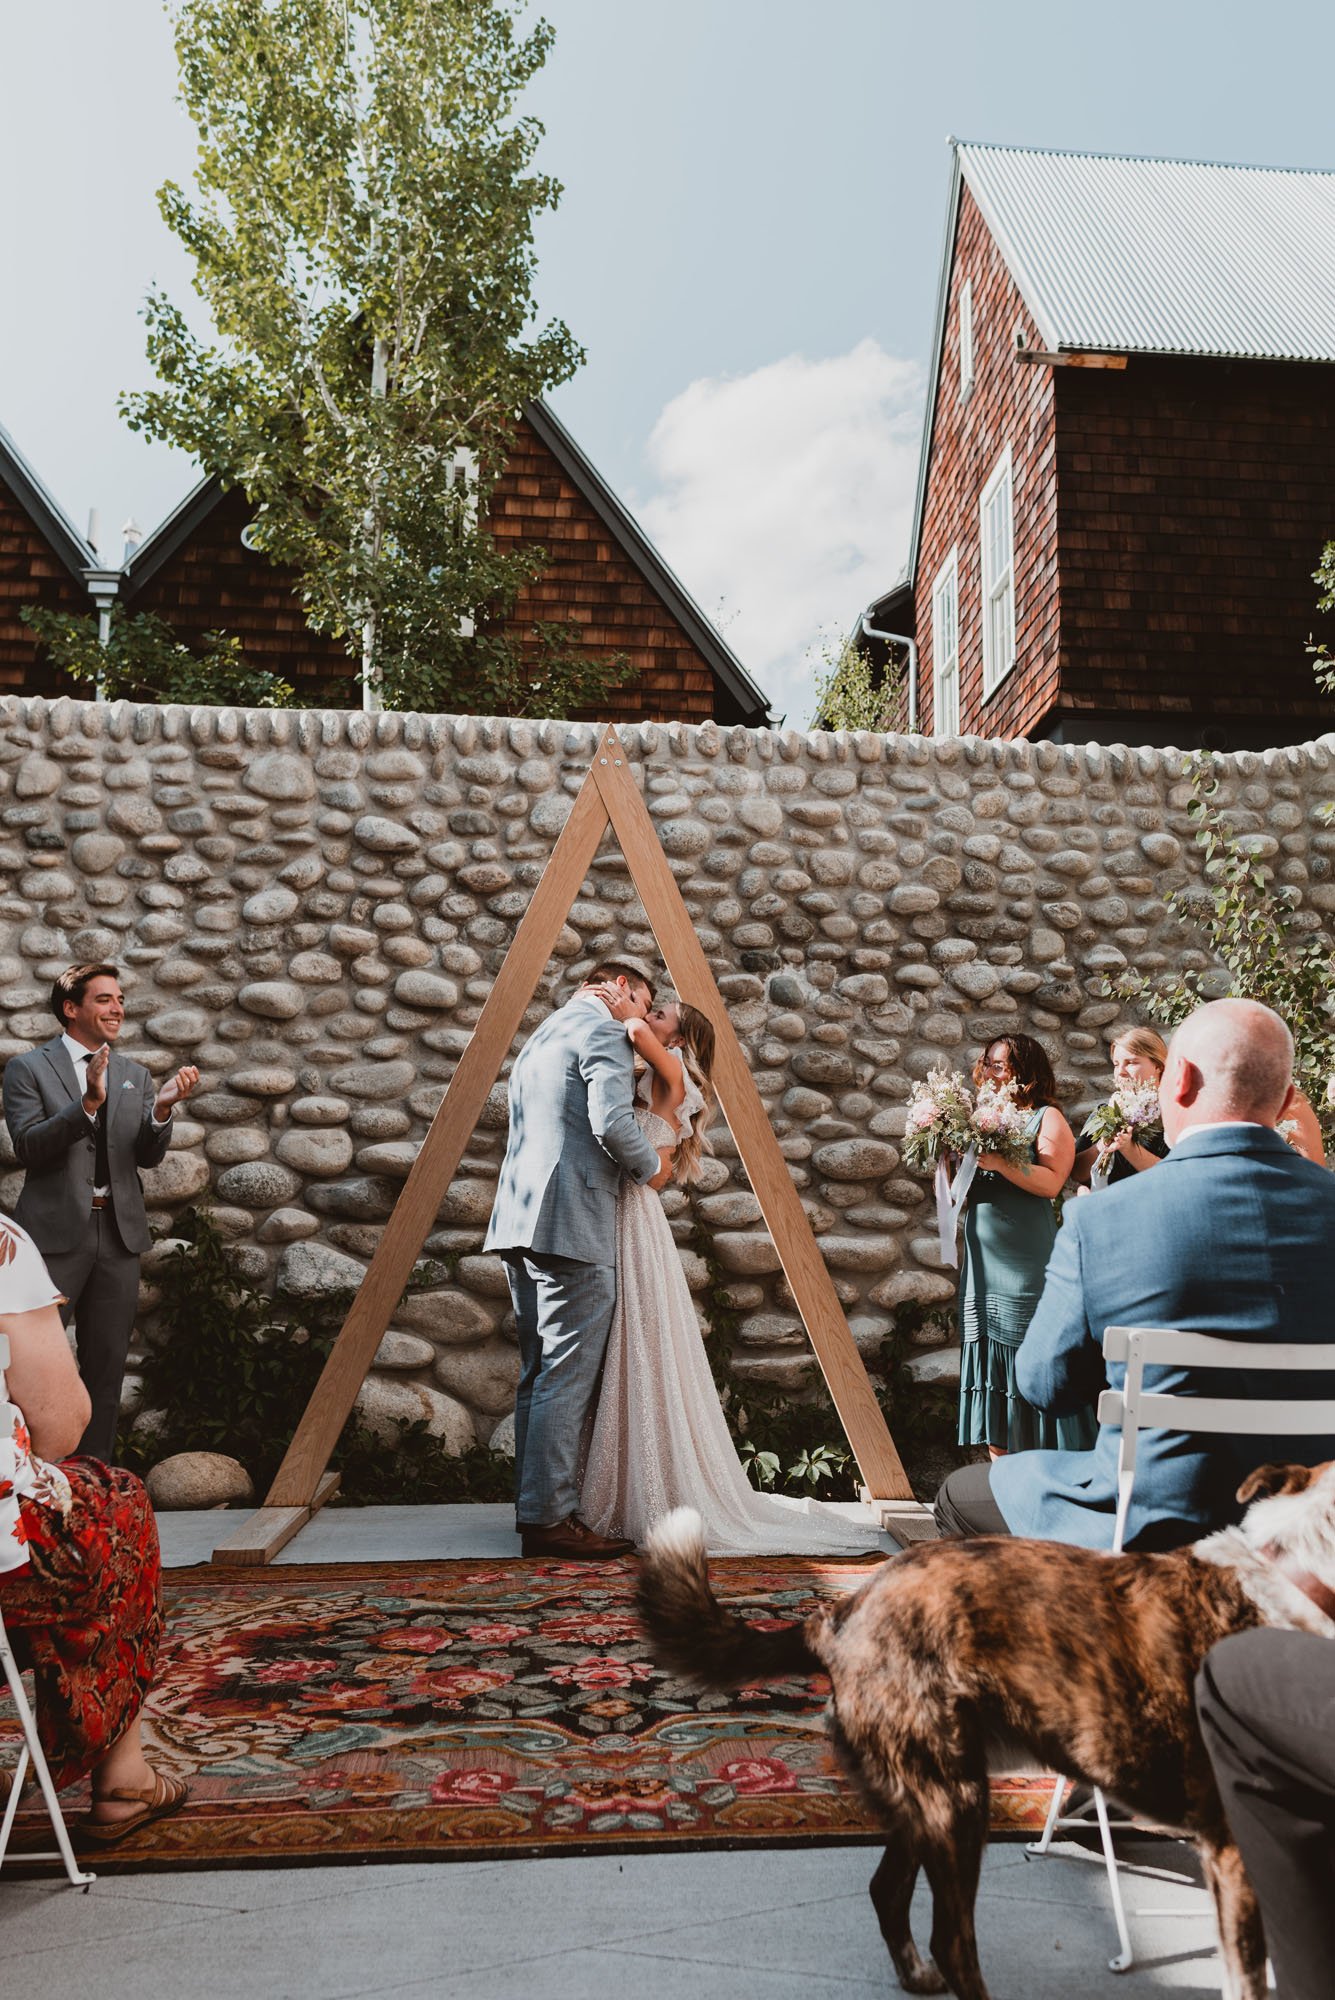 rustic and bohemian colorado wedding ceremony with a triangle alter and vintage rugs.